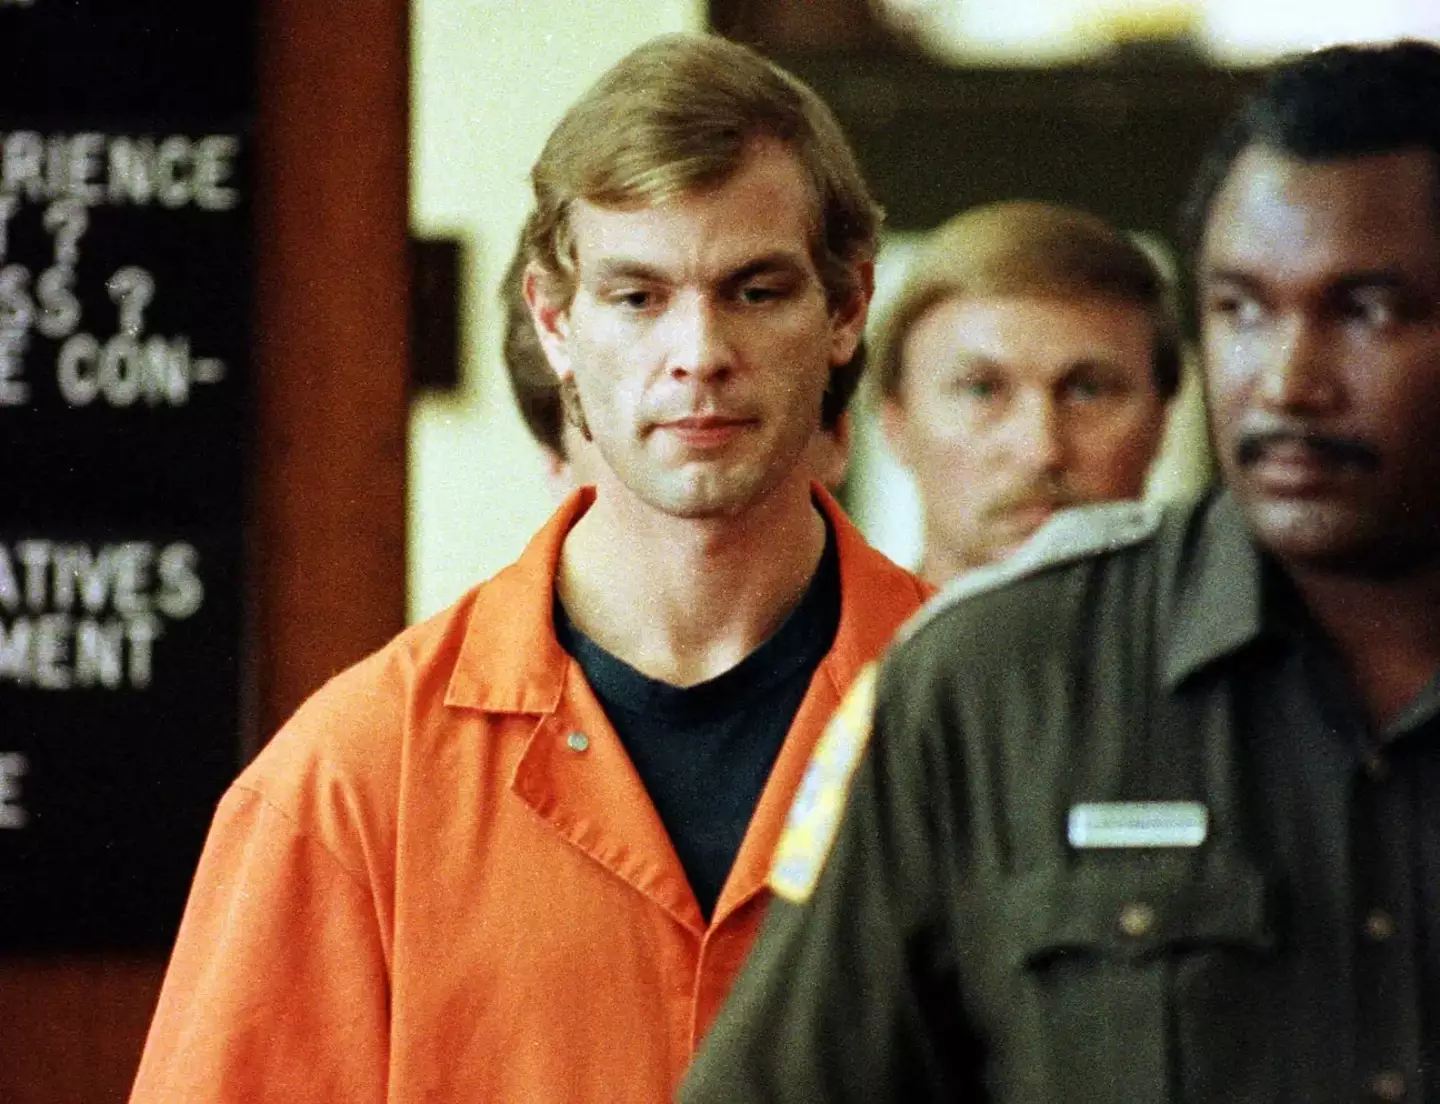 His attempted killer is sticking to his decision to have attacked Dahmer whilst they both served time at the Columbia Correctional Institution in Wisconsin.